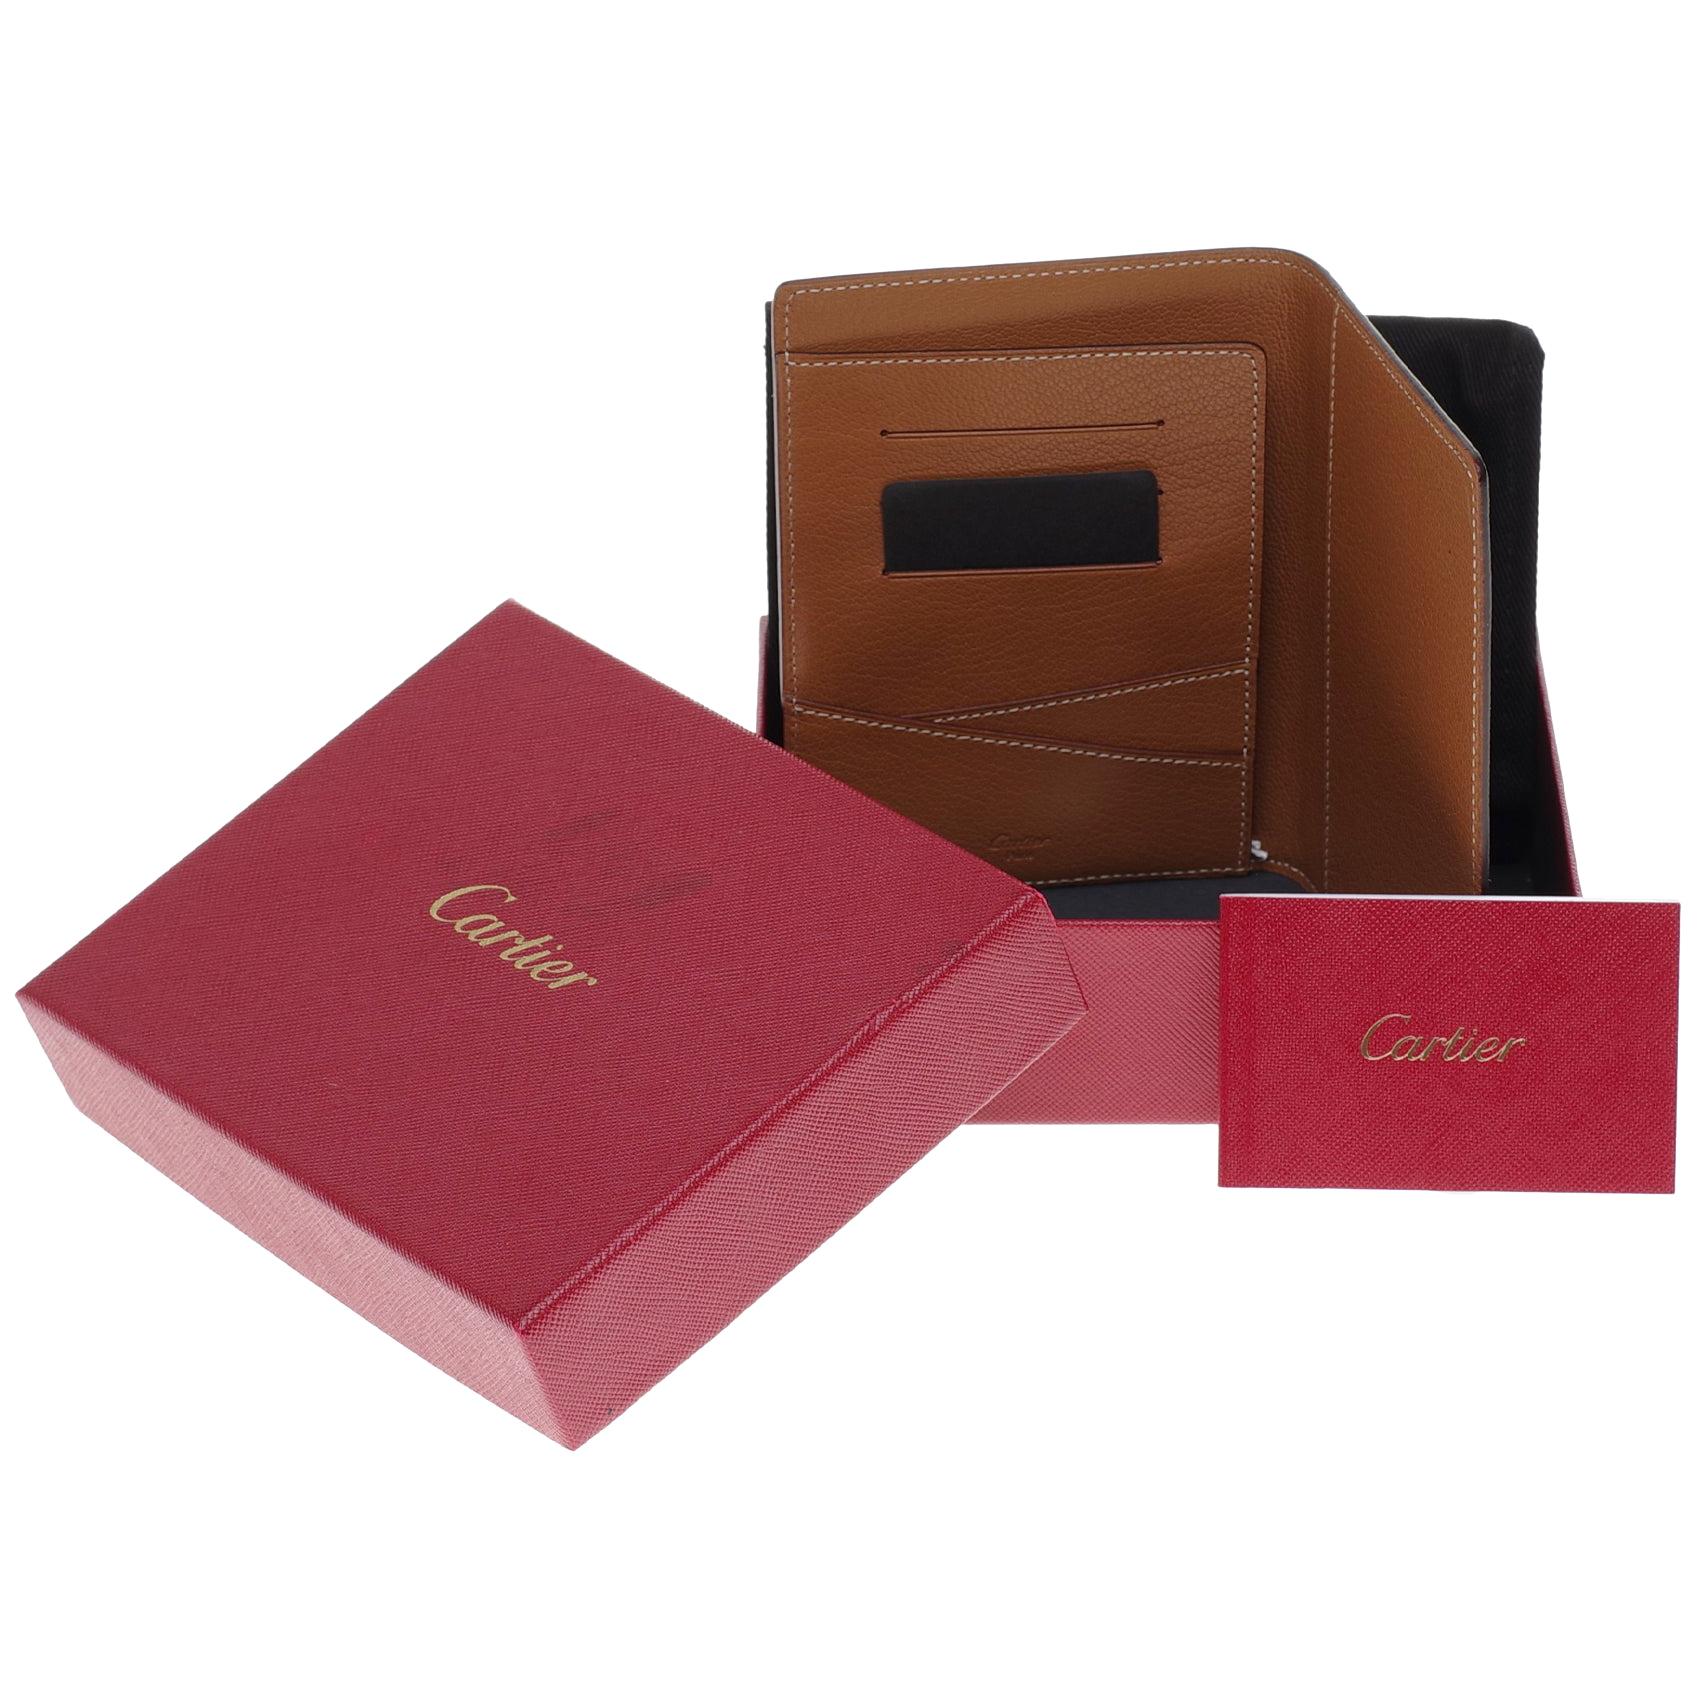 Cartier Passport/Cards holder in black & gold goat leather in pristine condition